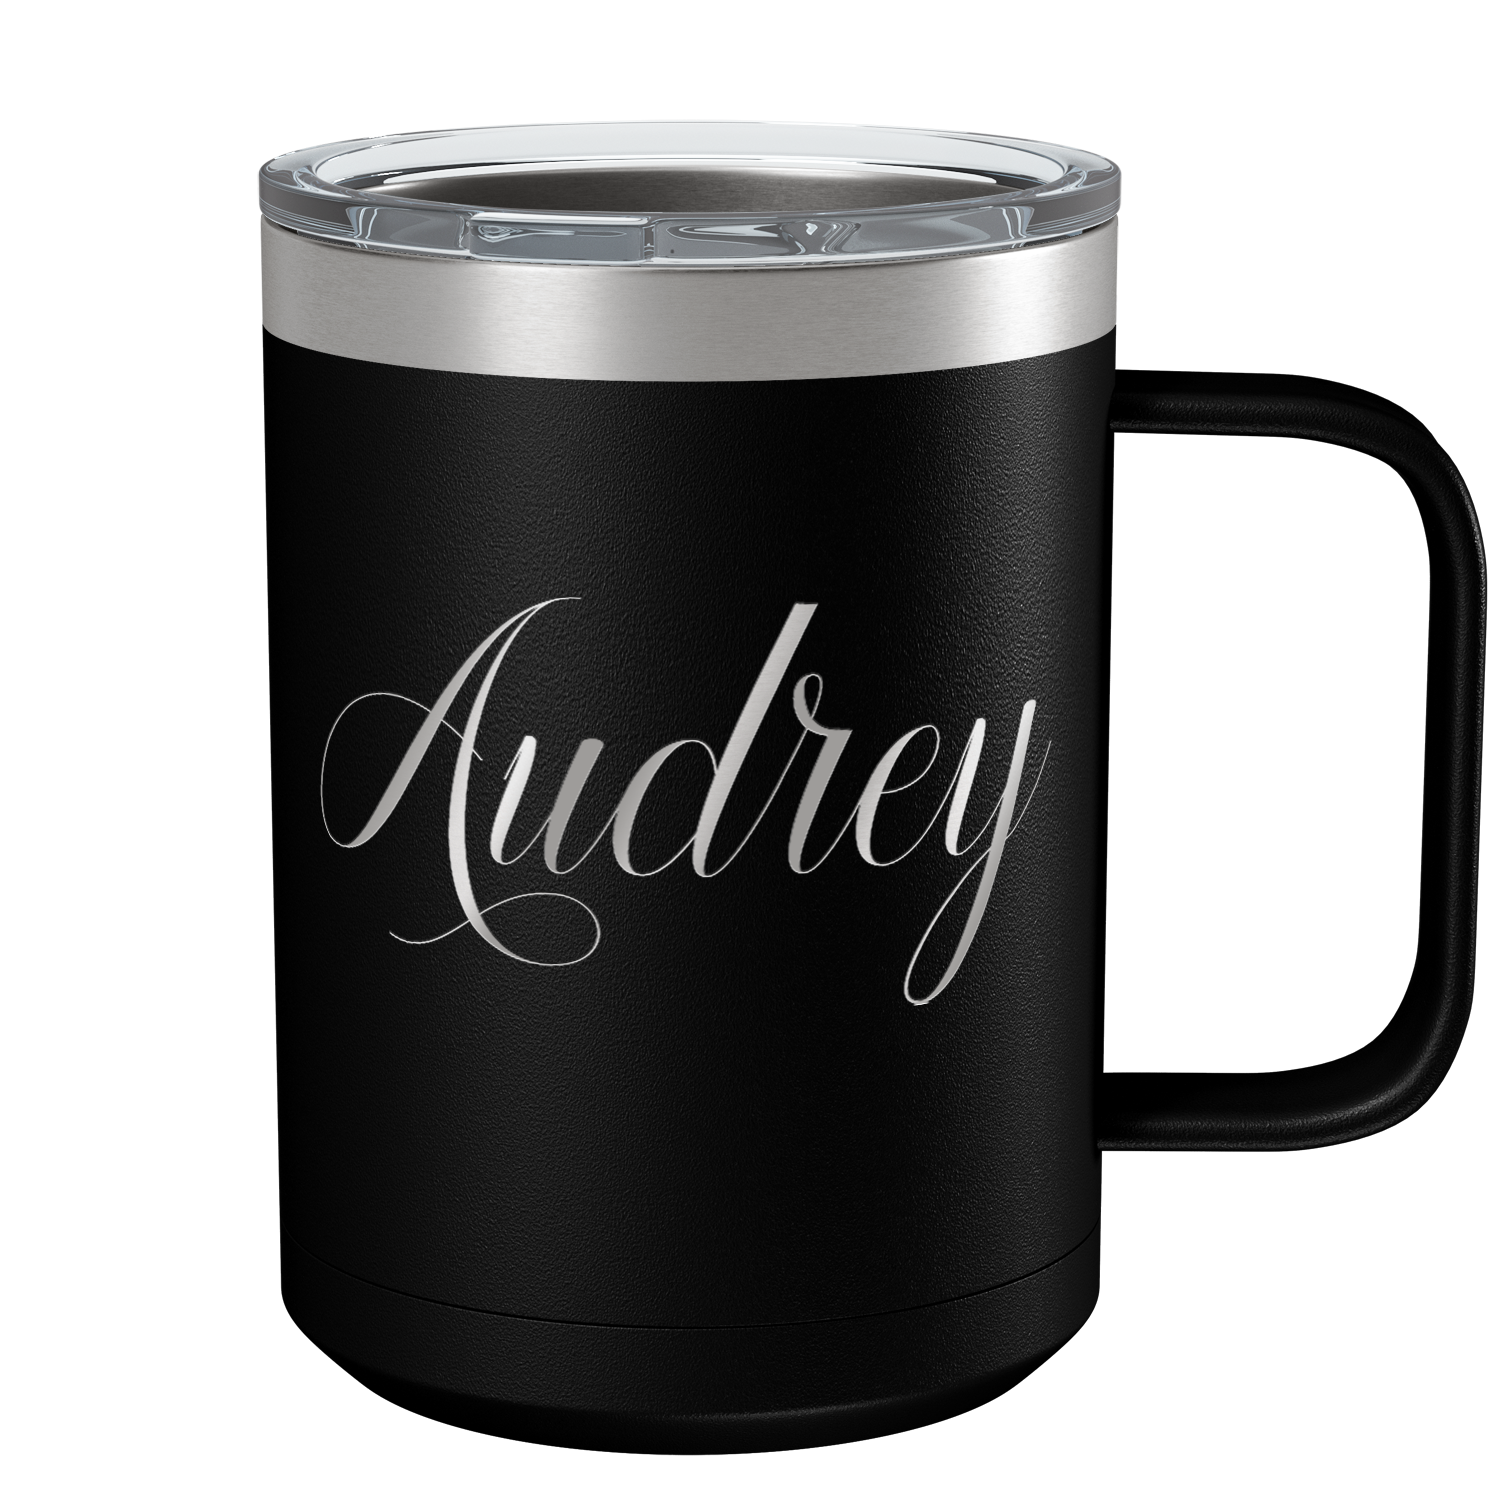 Cuptify Personalized Engraved 15 oz Stainless Steel Coffee Mug - Black